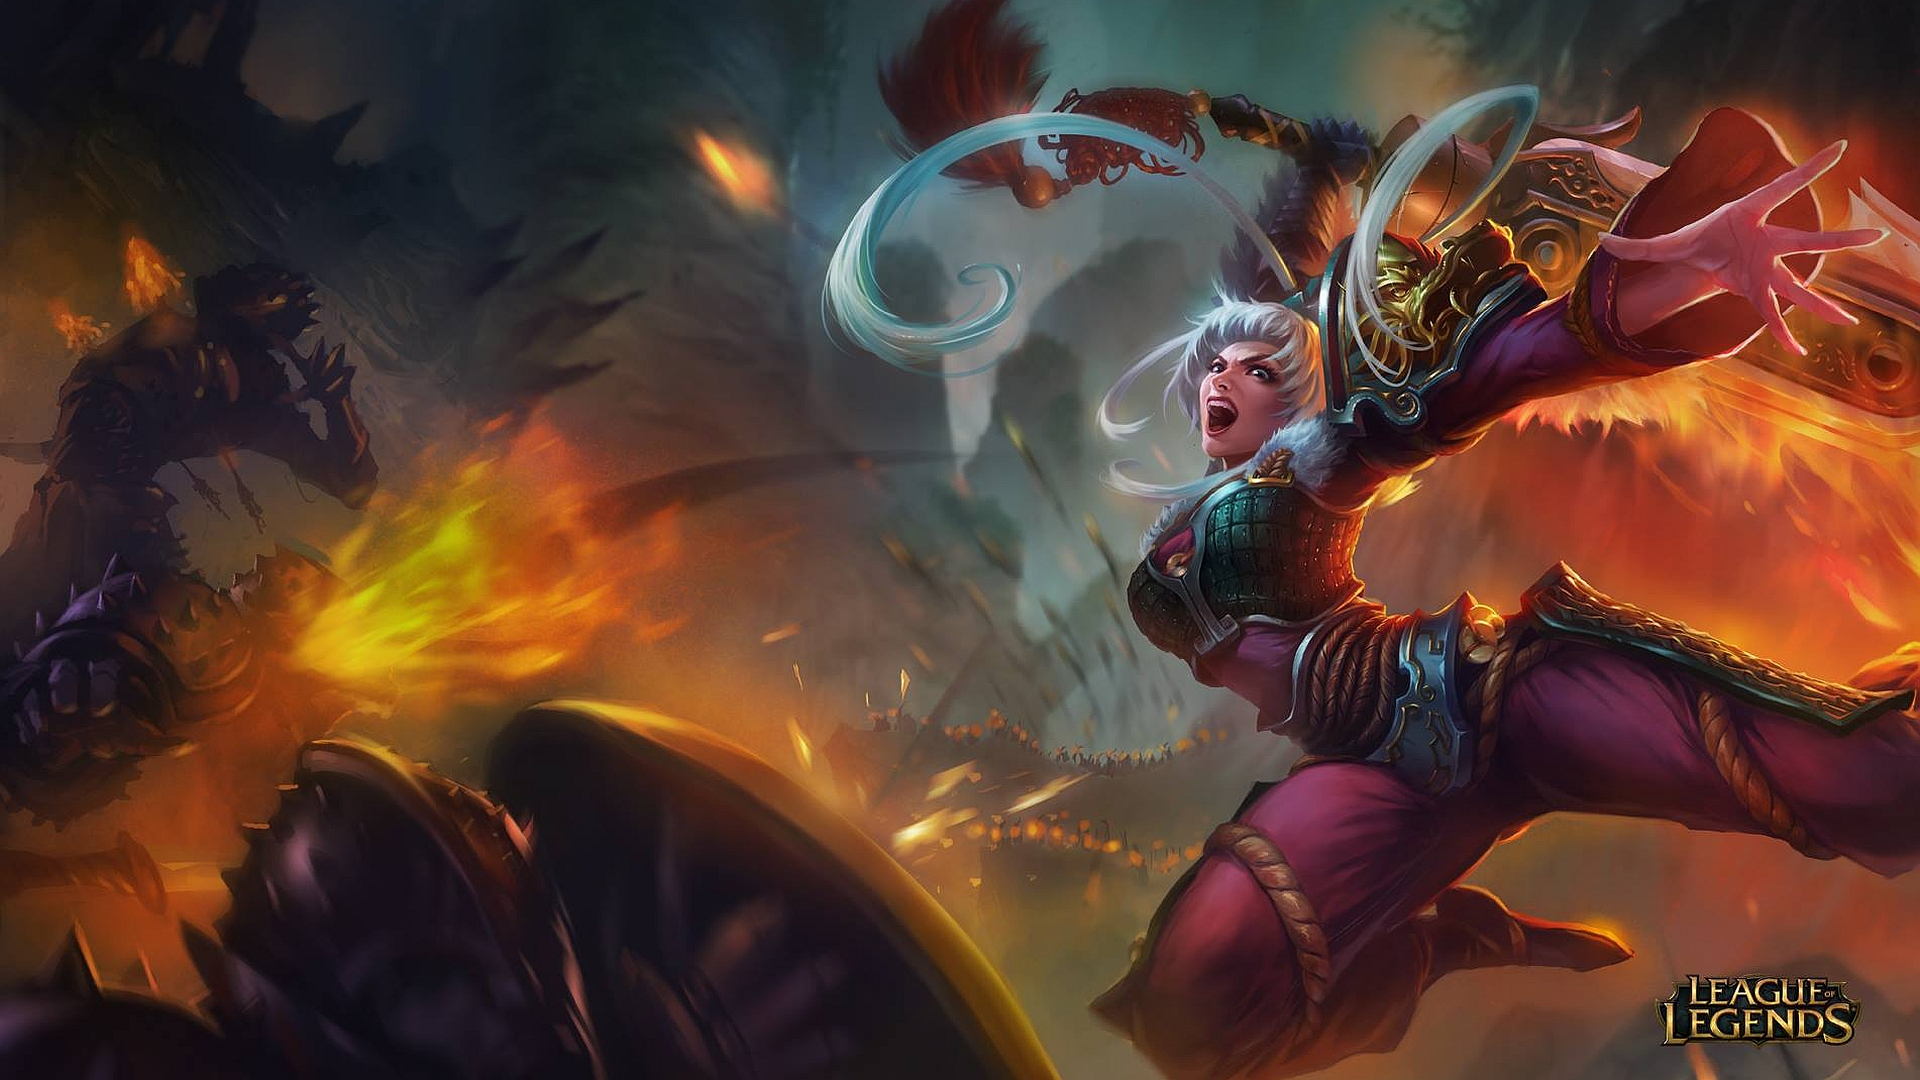 1920x1080 180+ Riven (League Of Legends) HD Wallpapers and Backgrounds